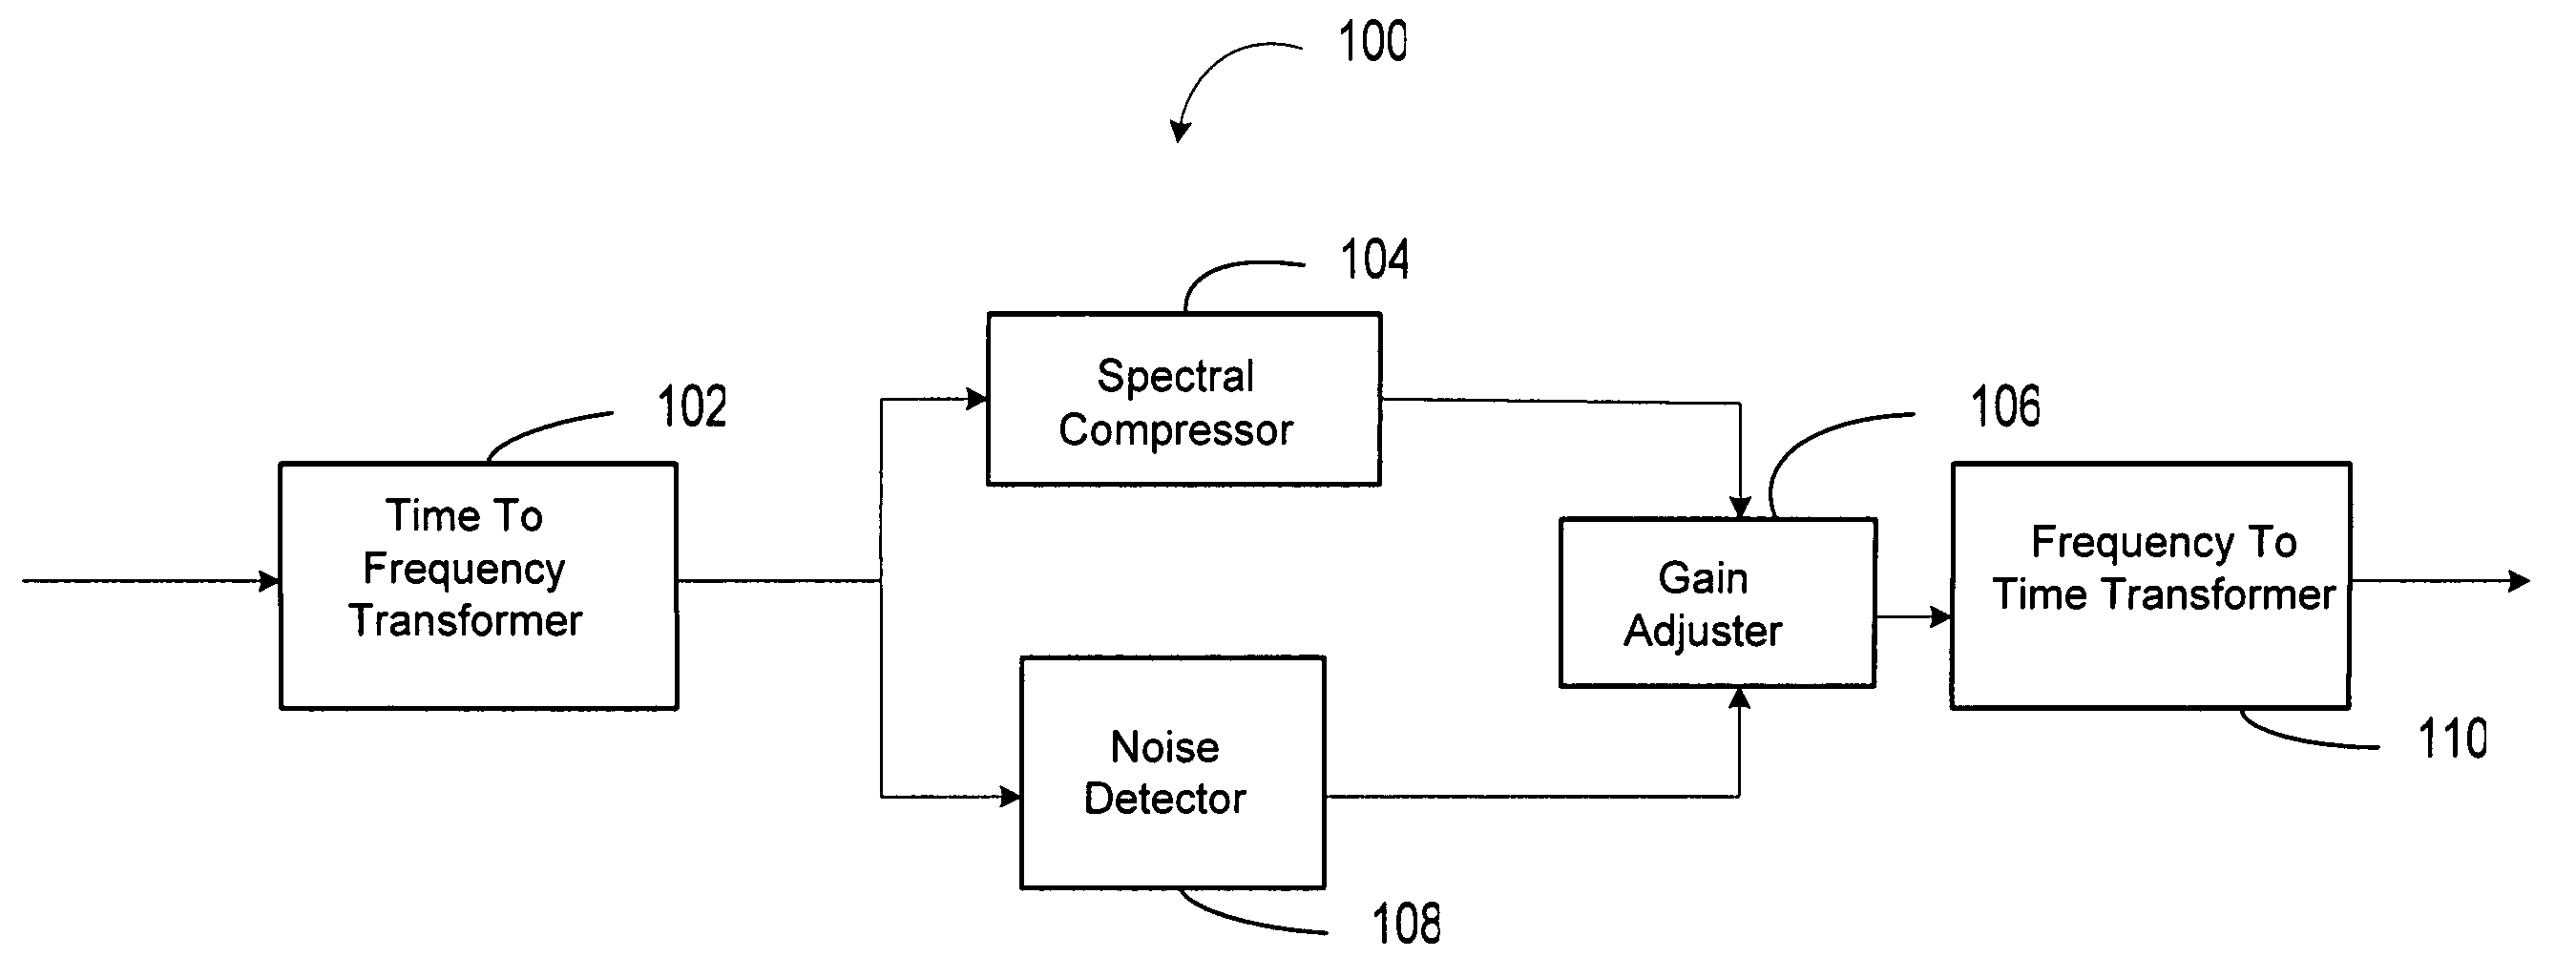 System for improving speech intelligibility through high frequency compression